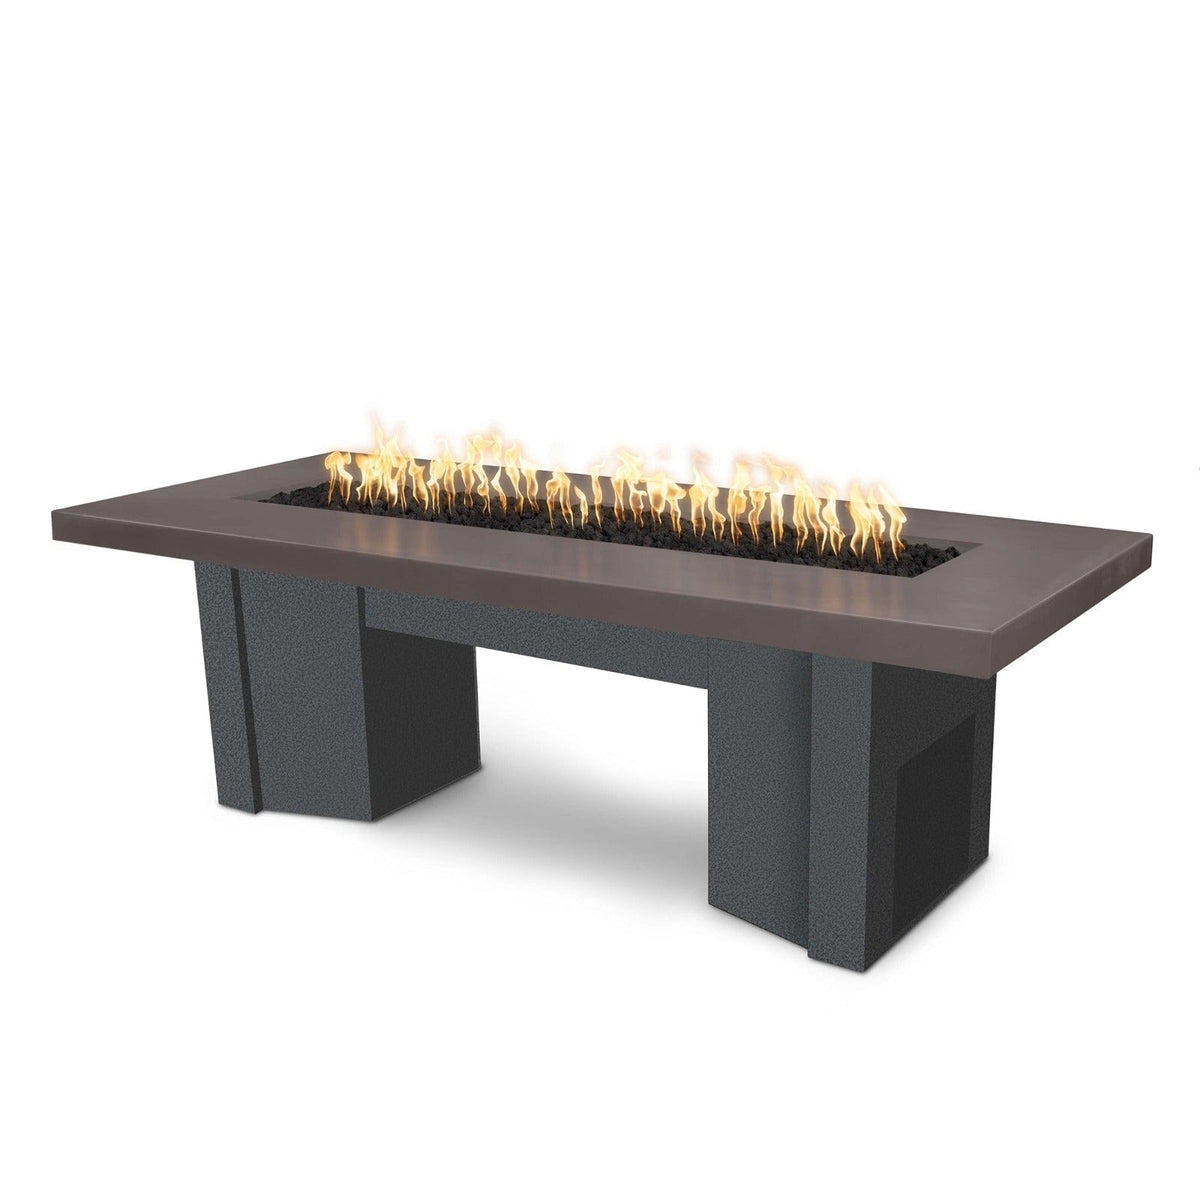 The Outdoor Plus Fire Features Chestnut (-CST) / Silver Vein Powder Coated Steel (-SLV) The Outdoor Plus 60&quot; Alameda Fire Table Smooth Concrete in Natural Gas - Flame Sense System with Push Button Spark Igniter / OPT-ALMGFRC60FSEN-NG